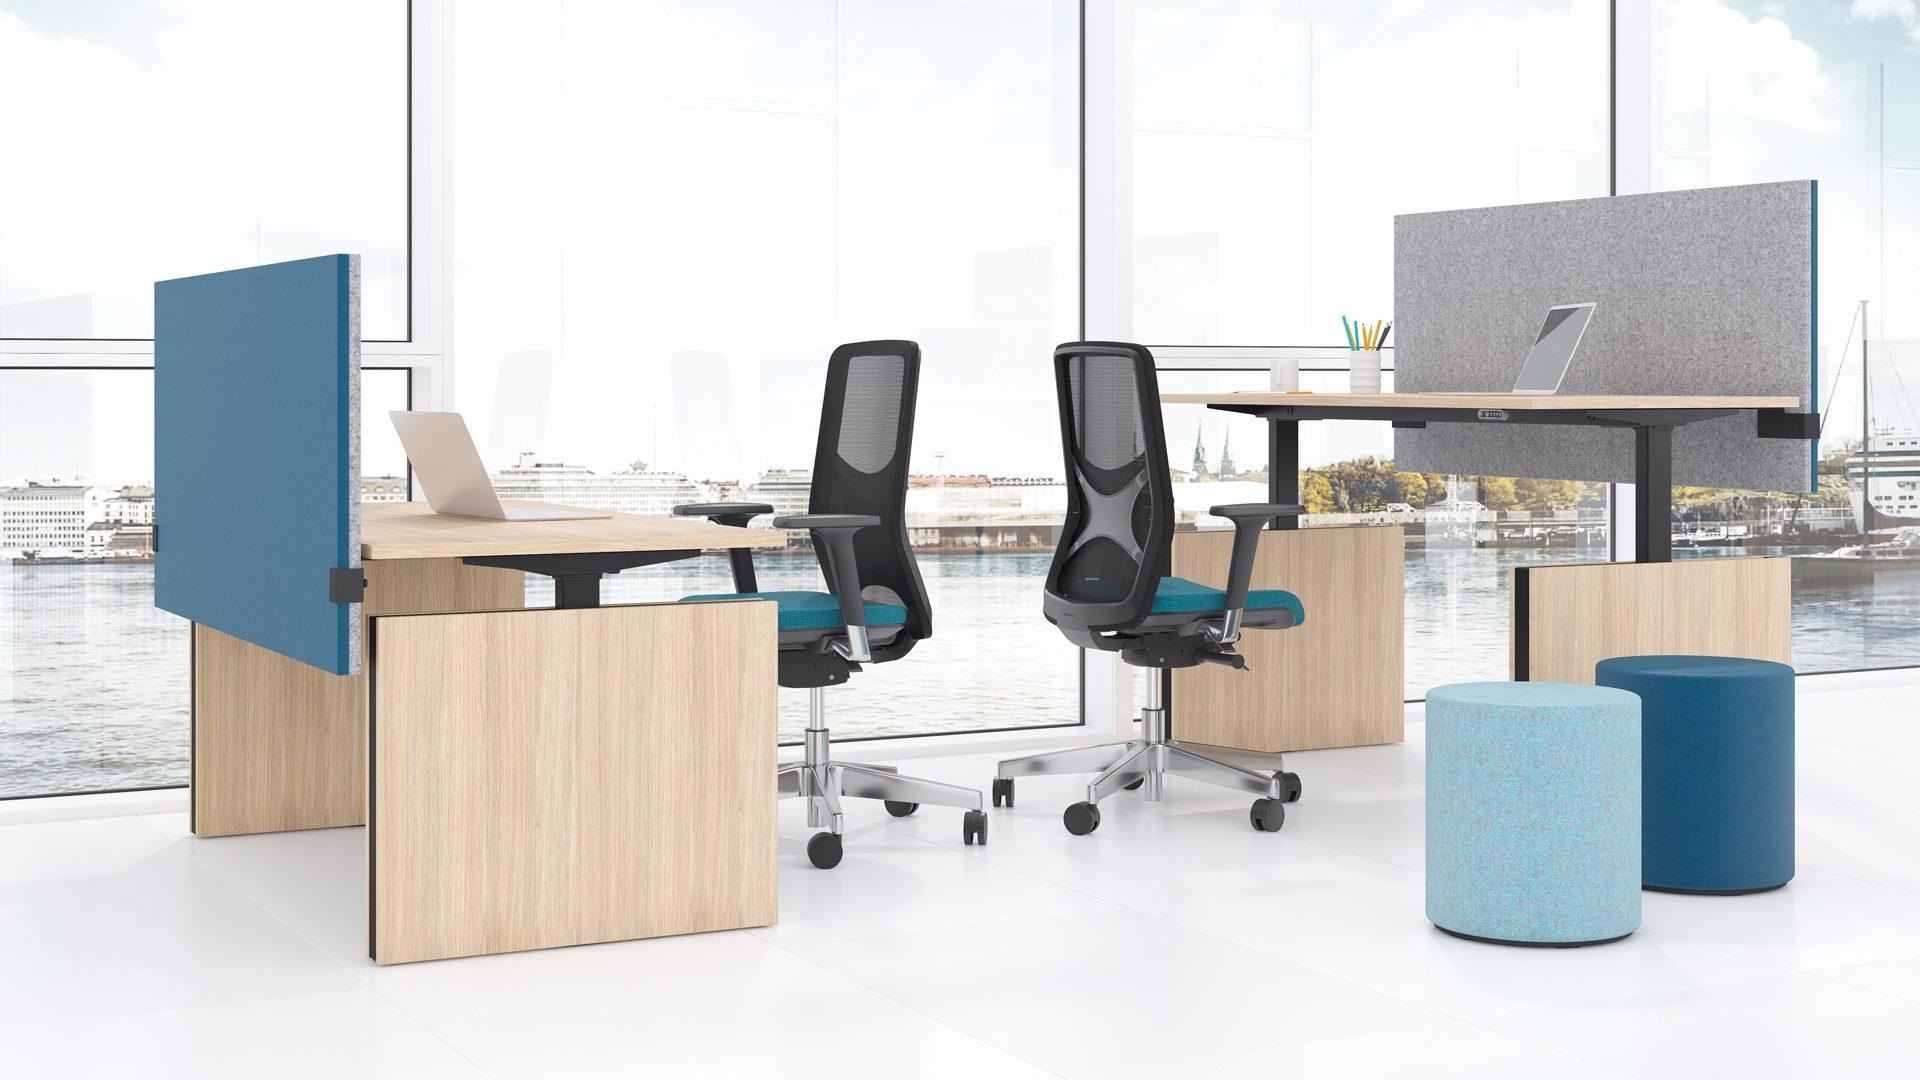 Modus screens create privacy for single sit/stand desks